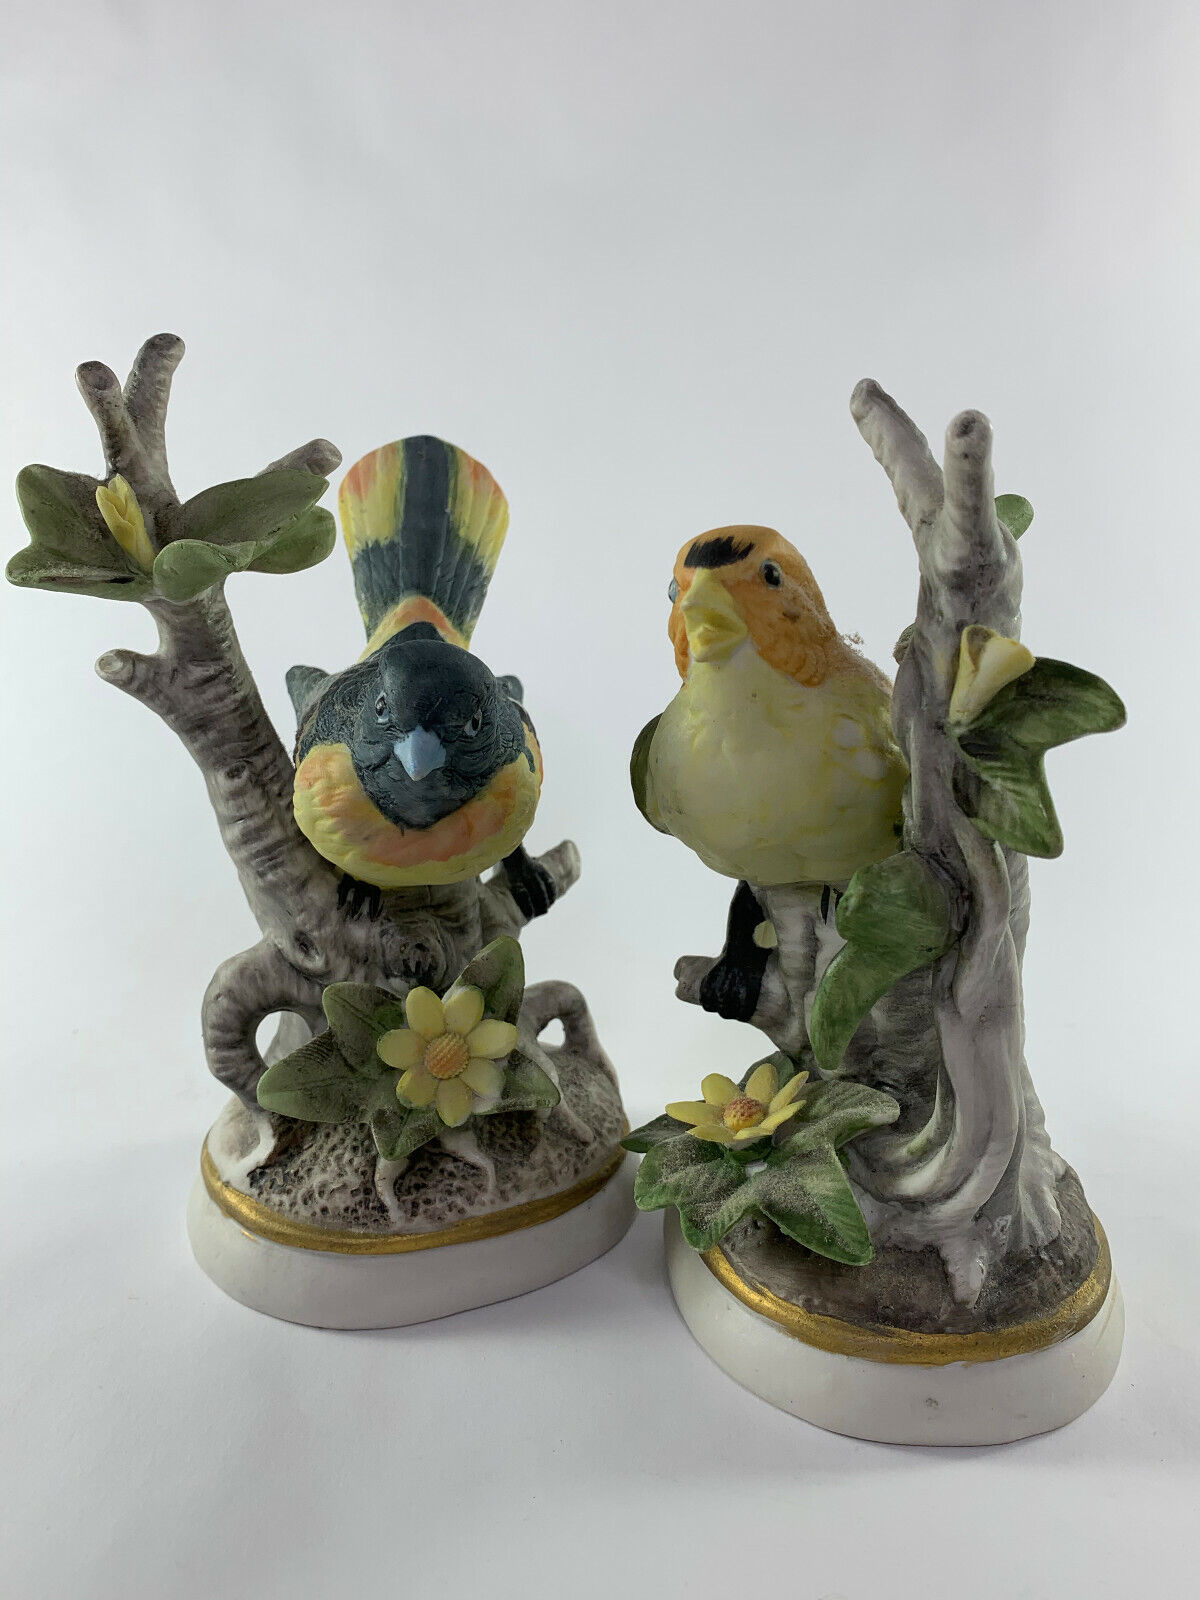 Vintage Ardco Dallas, 2 Bird Porcelain Figurines on trees with flowers